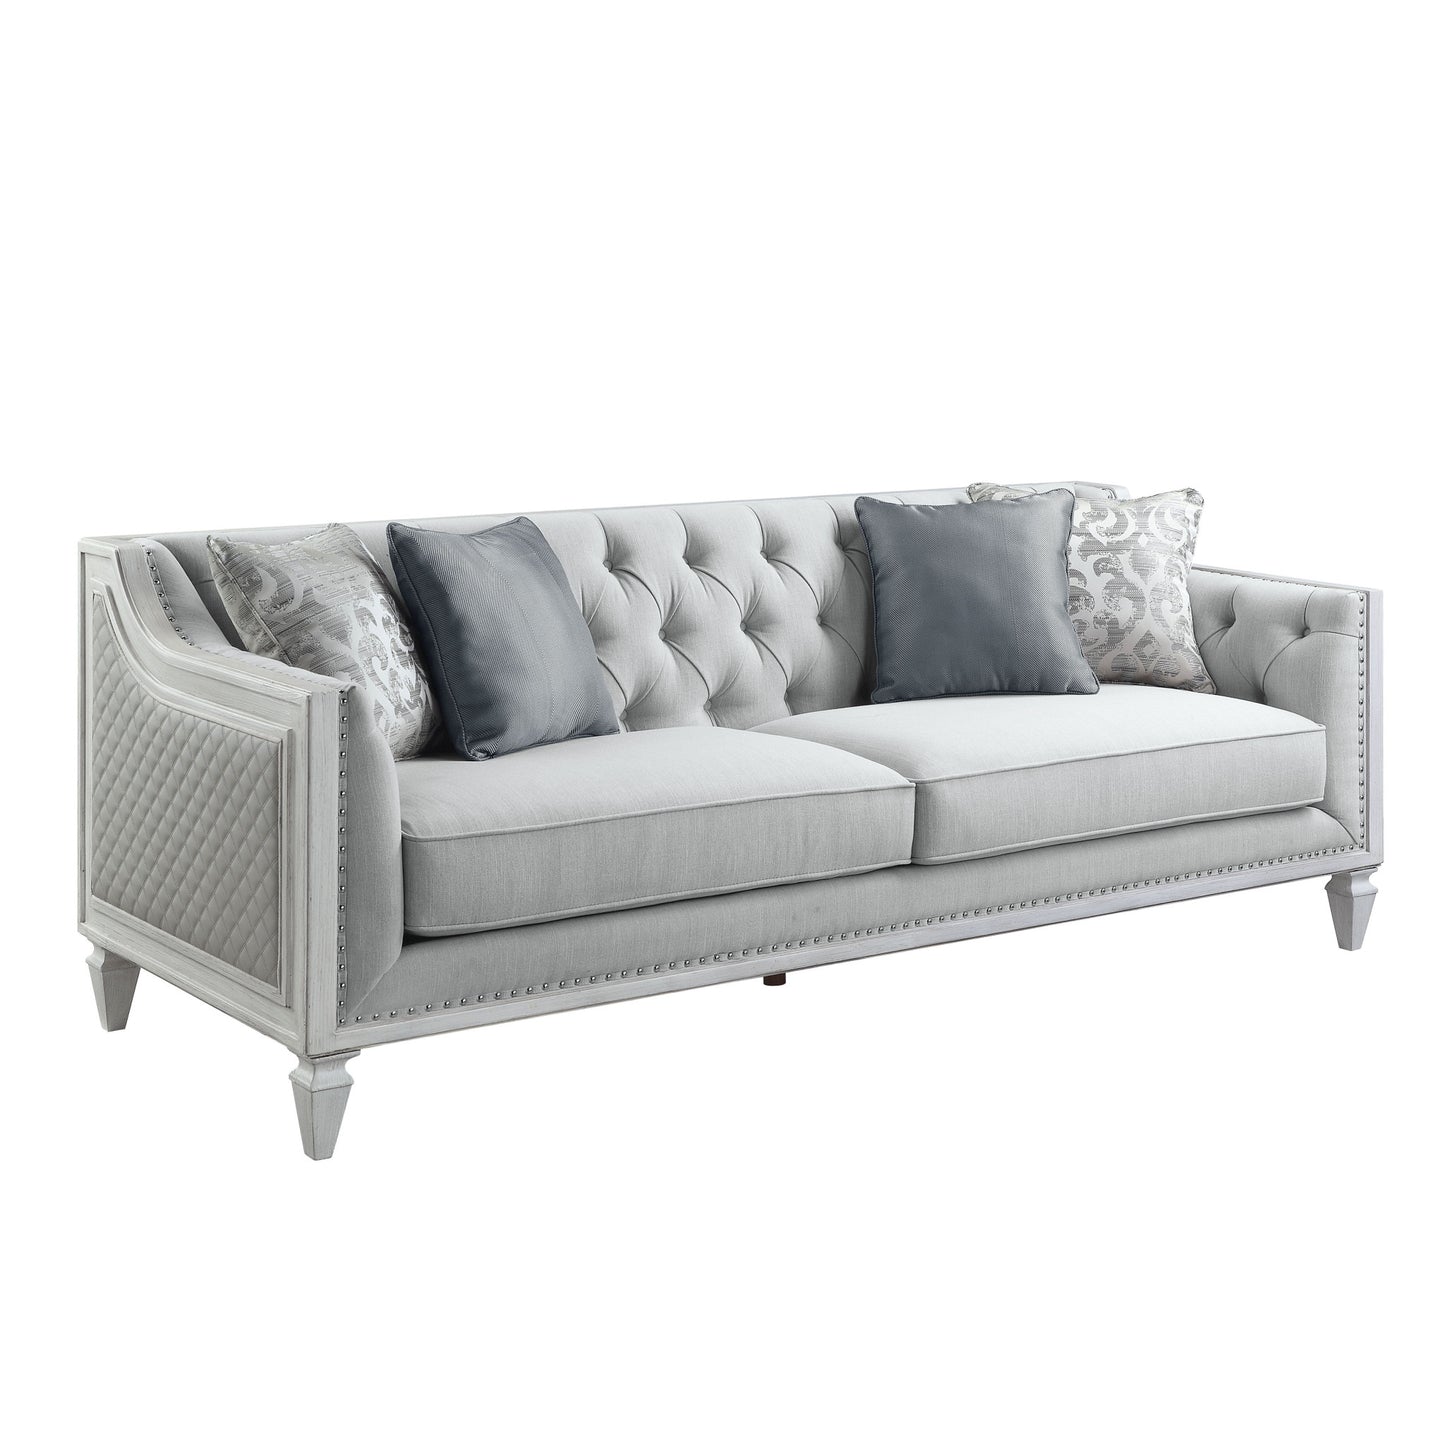 85" Light Gray Linen And White Sofa With Four Toss Pillows